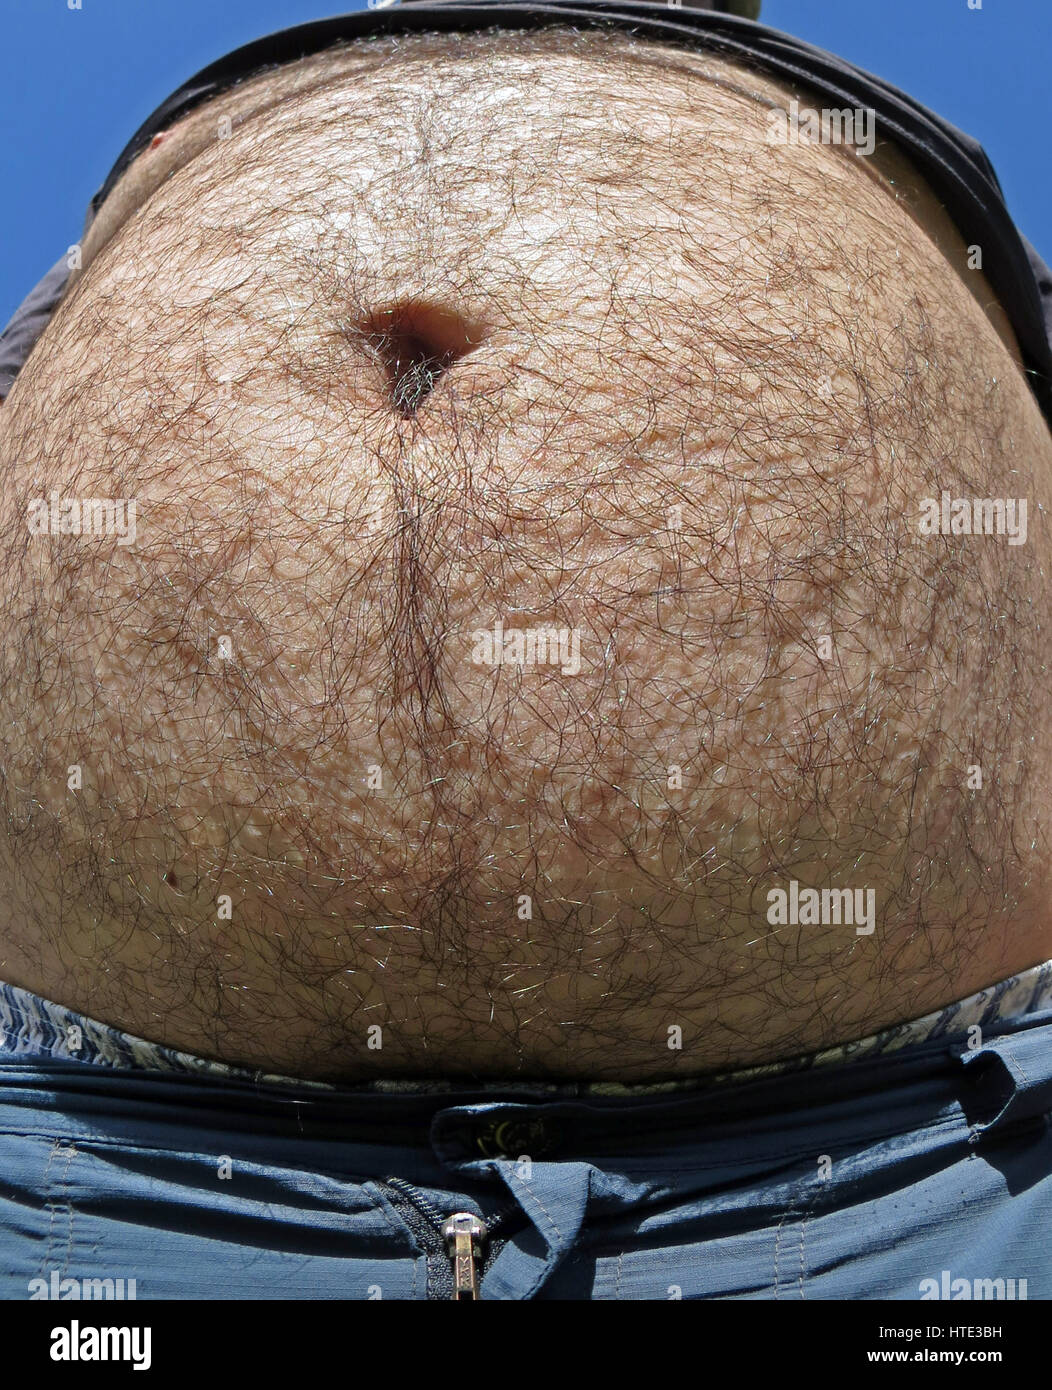 A fat man with a big belly Stock Photo